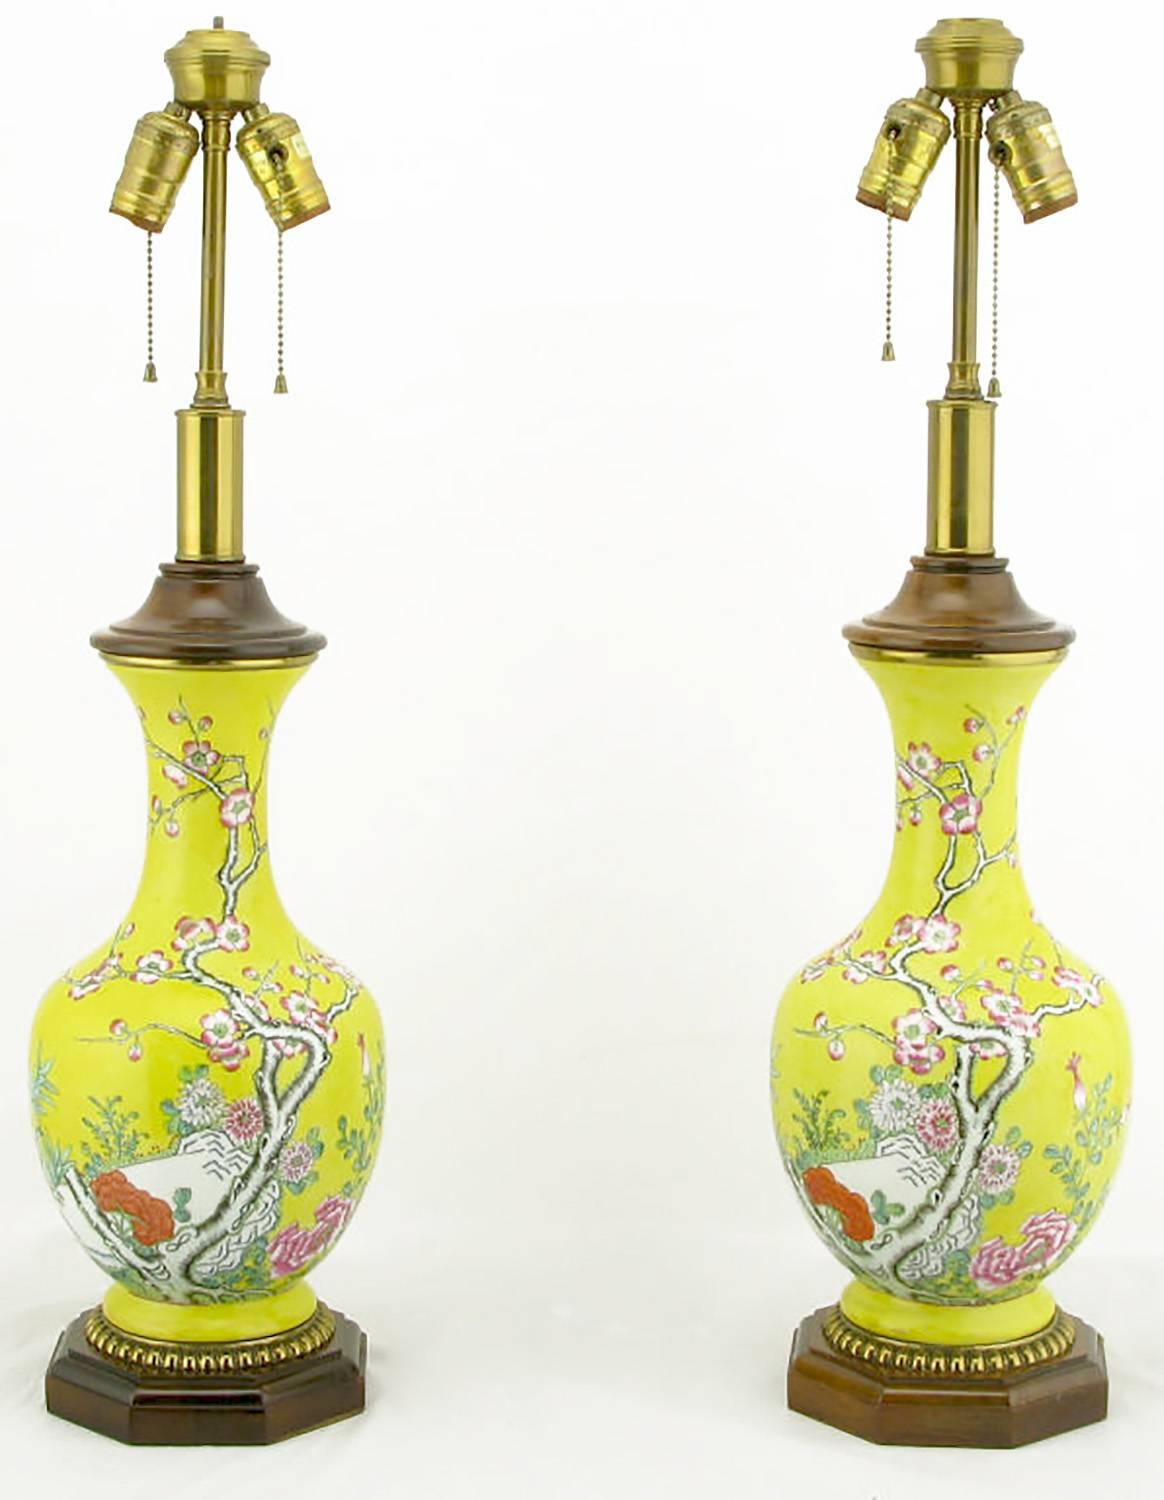 Vase form chinoiserie table lamps by Paul Hanson. The bodies are comprised of a vibrant yellow glazed ceramic vase with hand painted floral detail. The base is carved wood, with gilt egg detail. Cap is also carved wood over a brass neck. Adjustable